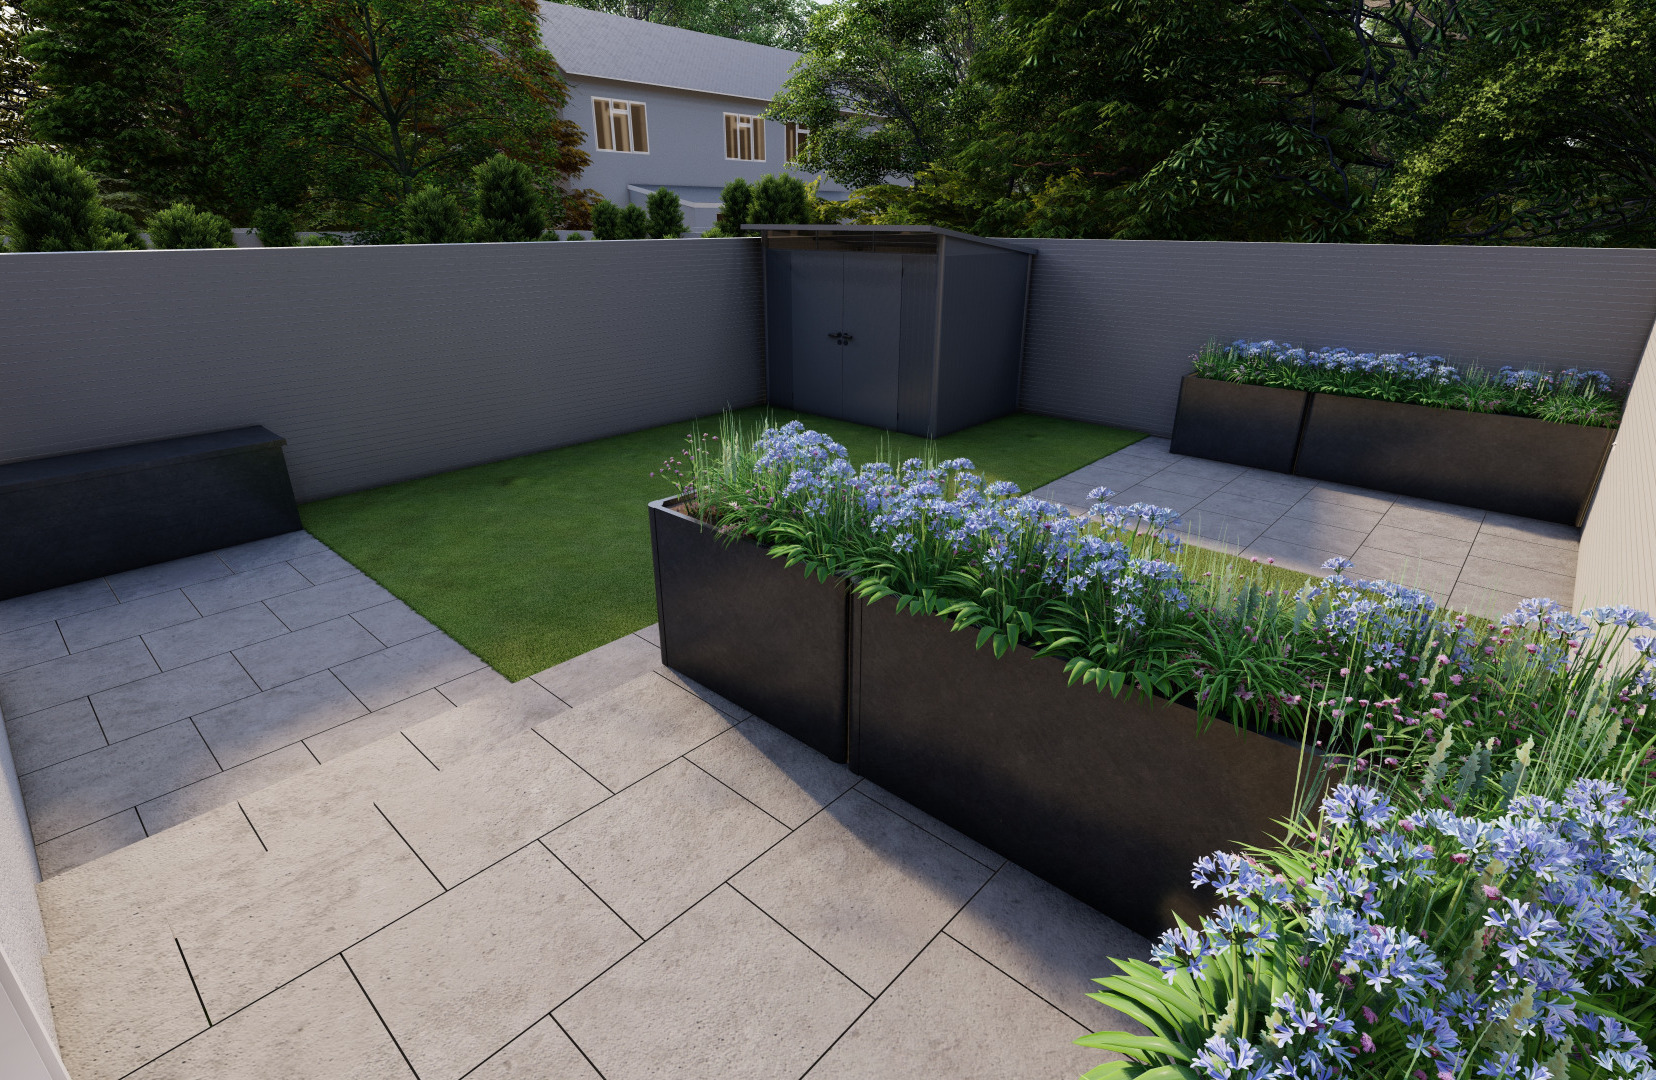 Family Garden Design in Templeogue, Dublin 6W with emphasis on optimising play space and limiting practical Patio options, Biohort Garden Shed, Biohort Garden Planters & custom made garden fencing  | Owen Chubb Garden Landscapers